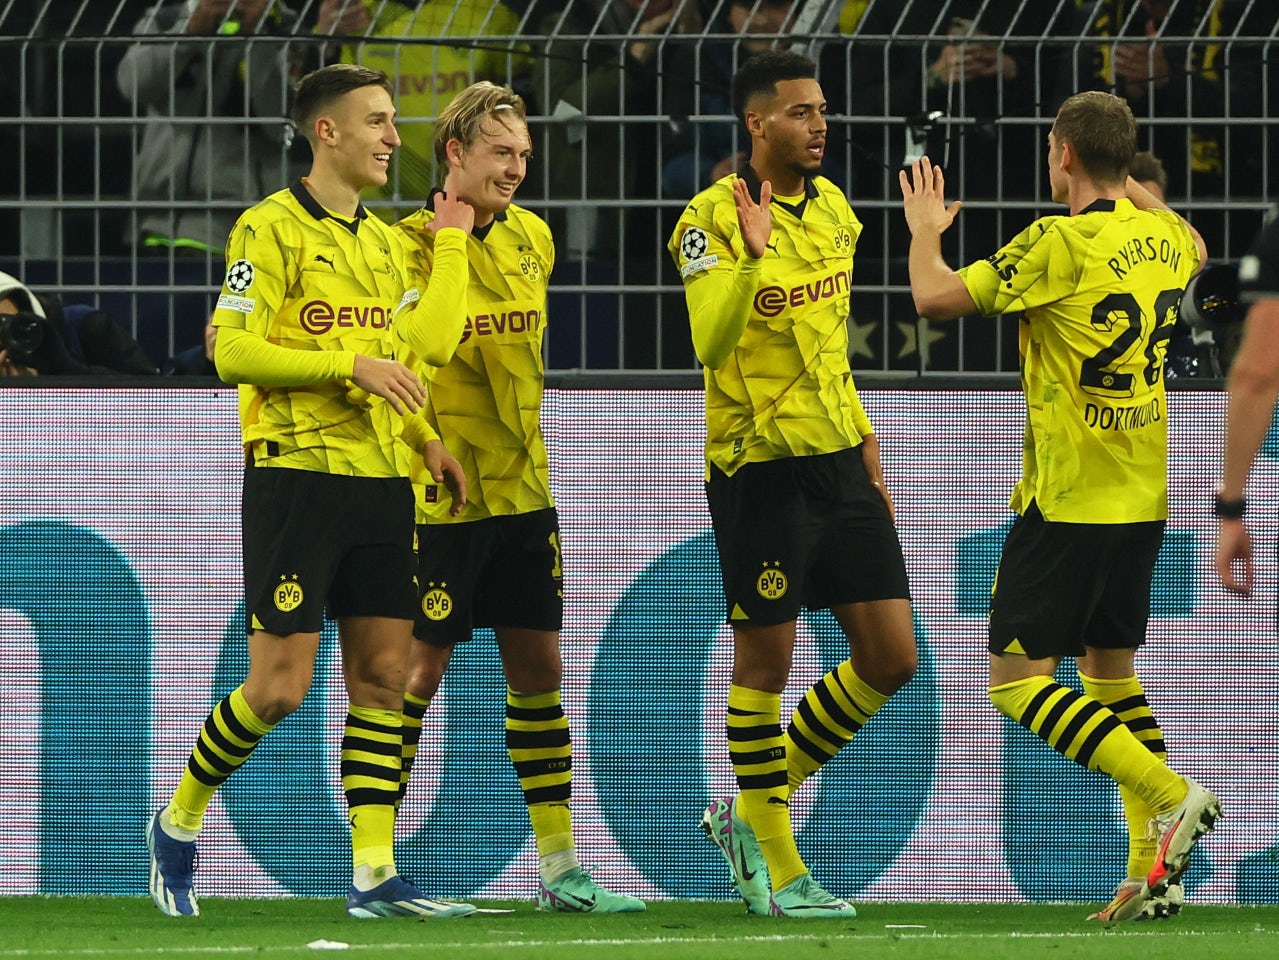 Borussia Dortmund move to top of Group F with 2-0 win over Newcastle United